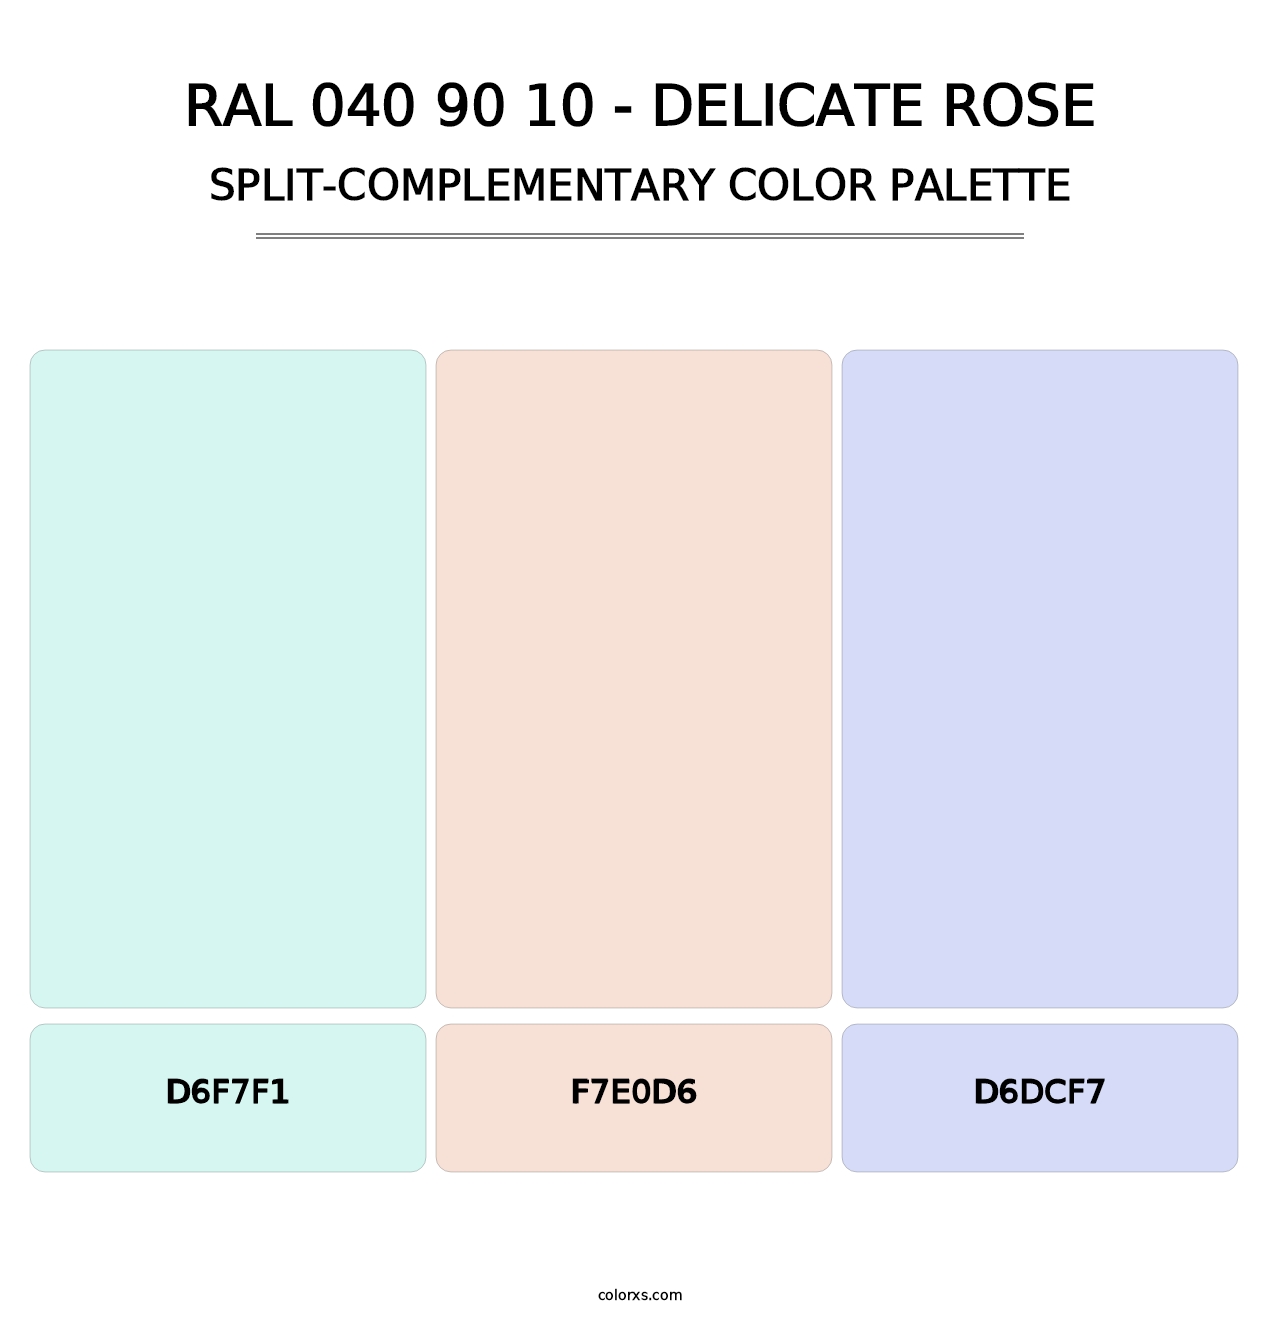 RAL 040 90 10 - Delicate Rose - Split-Complementary Color Palette